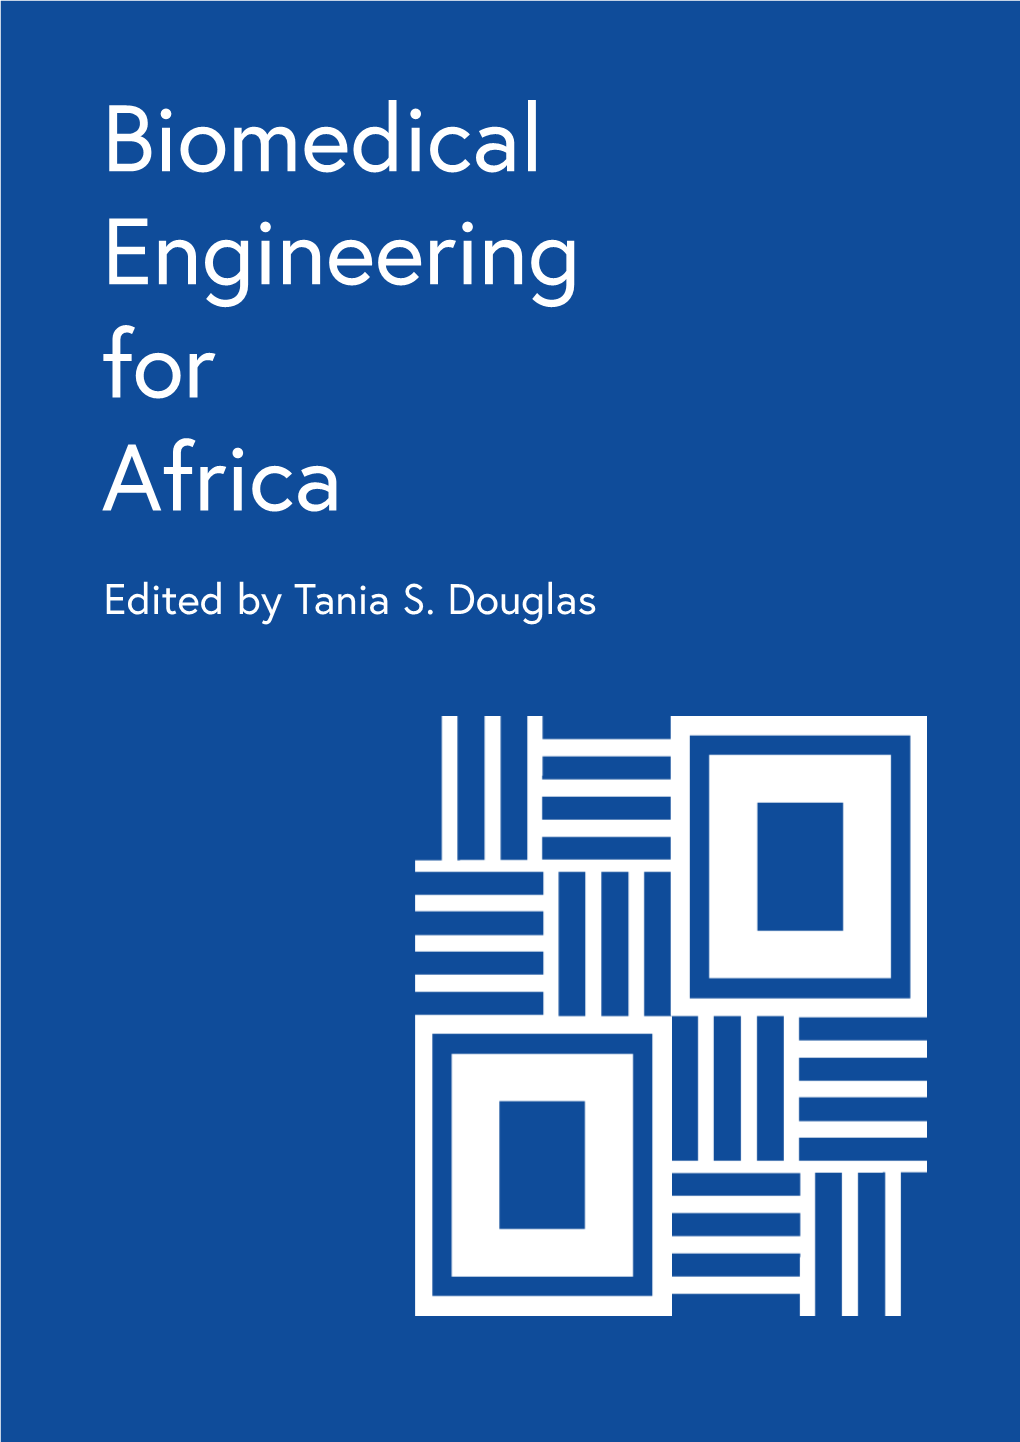 Biomedical Engineering for Africa